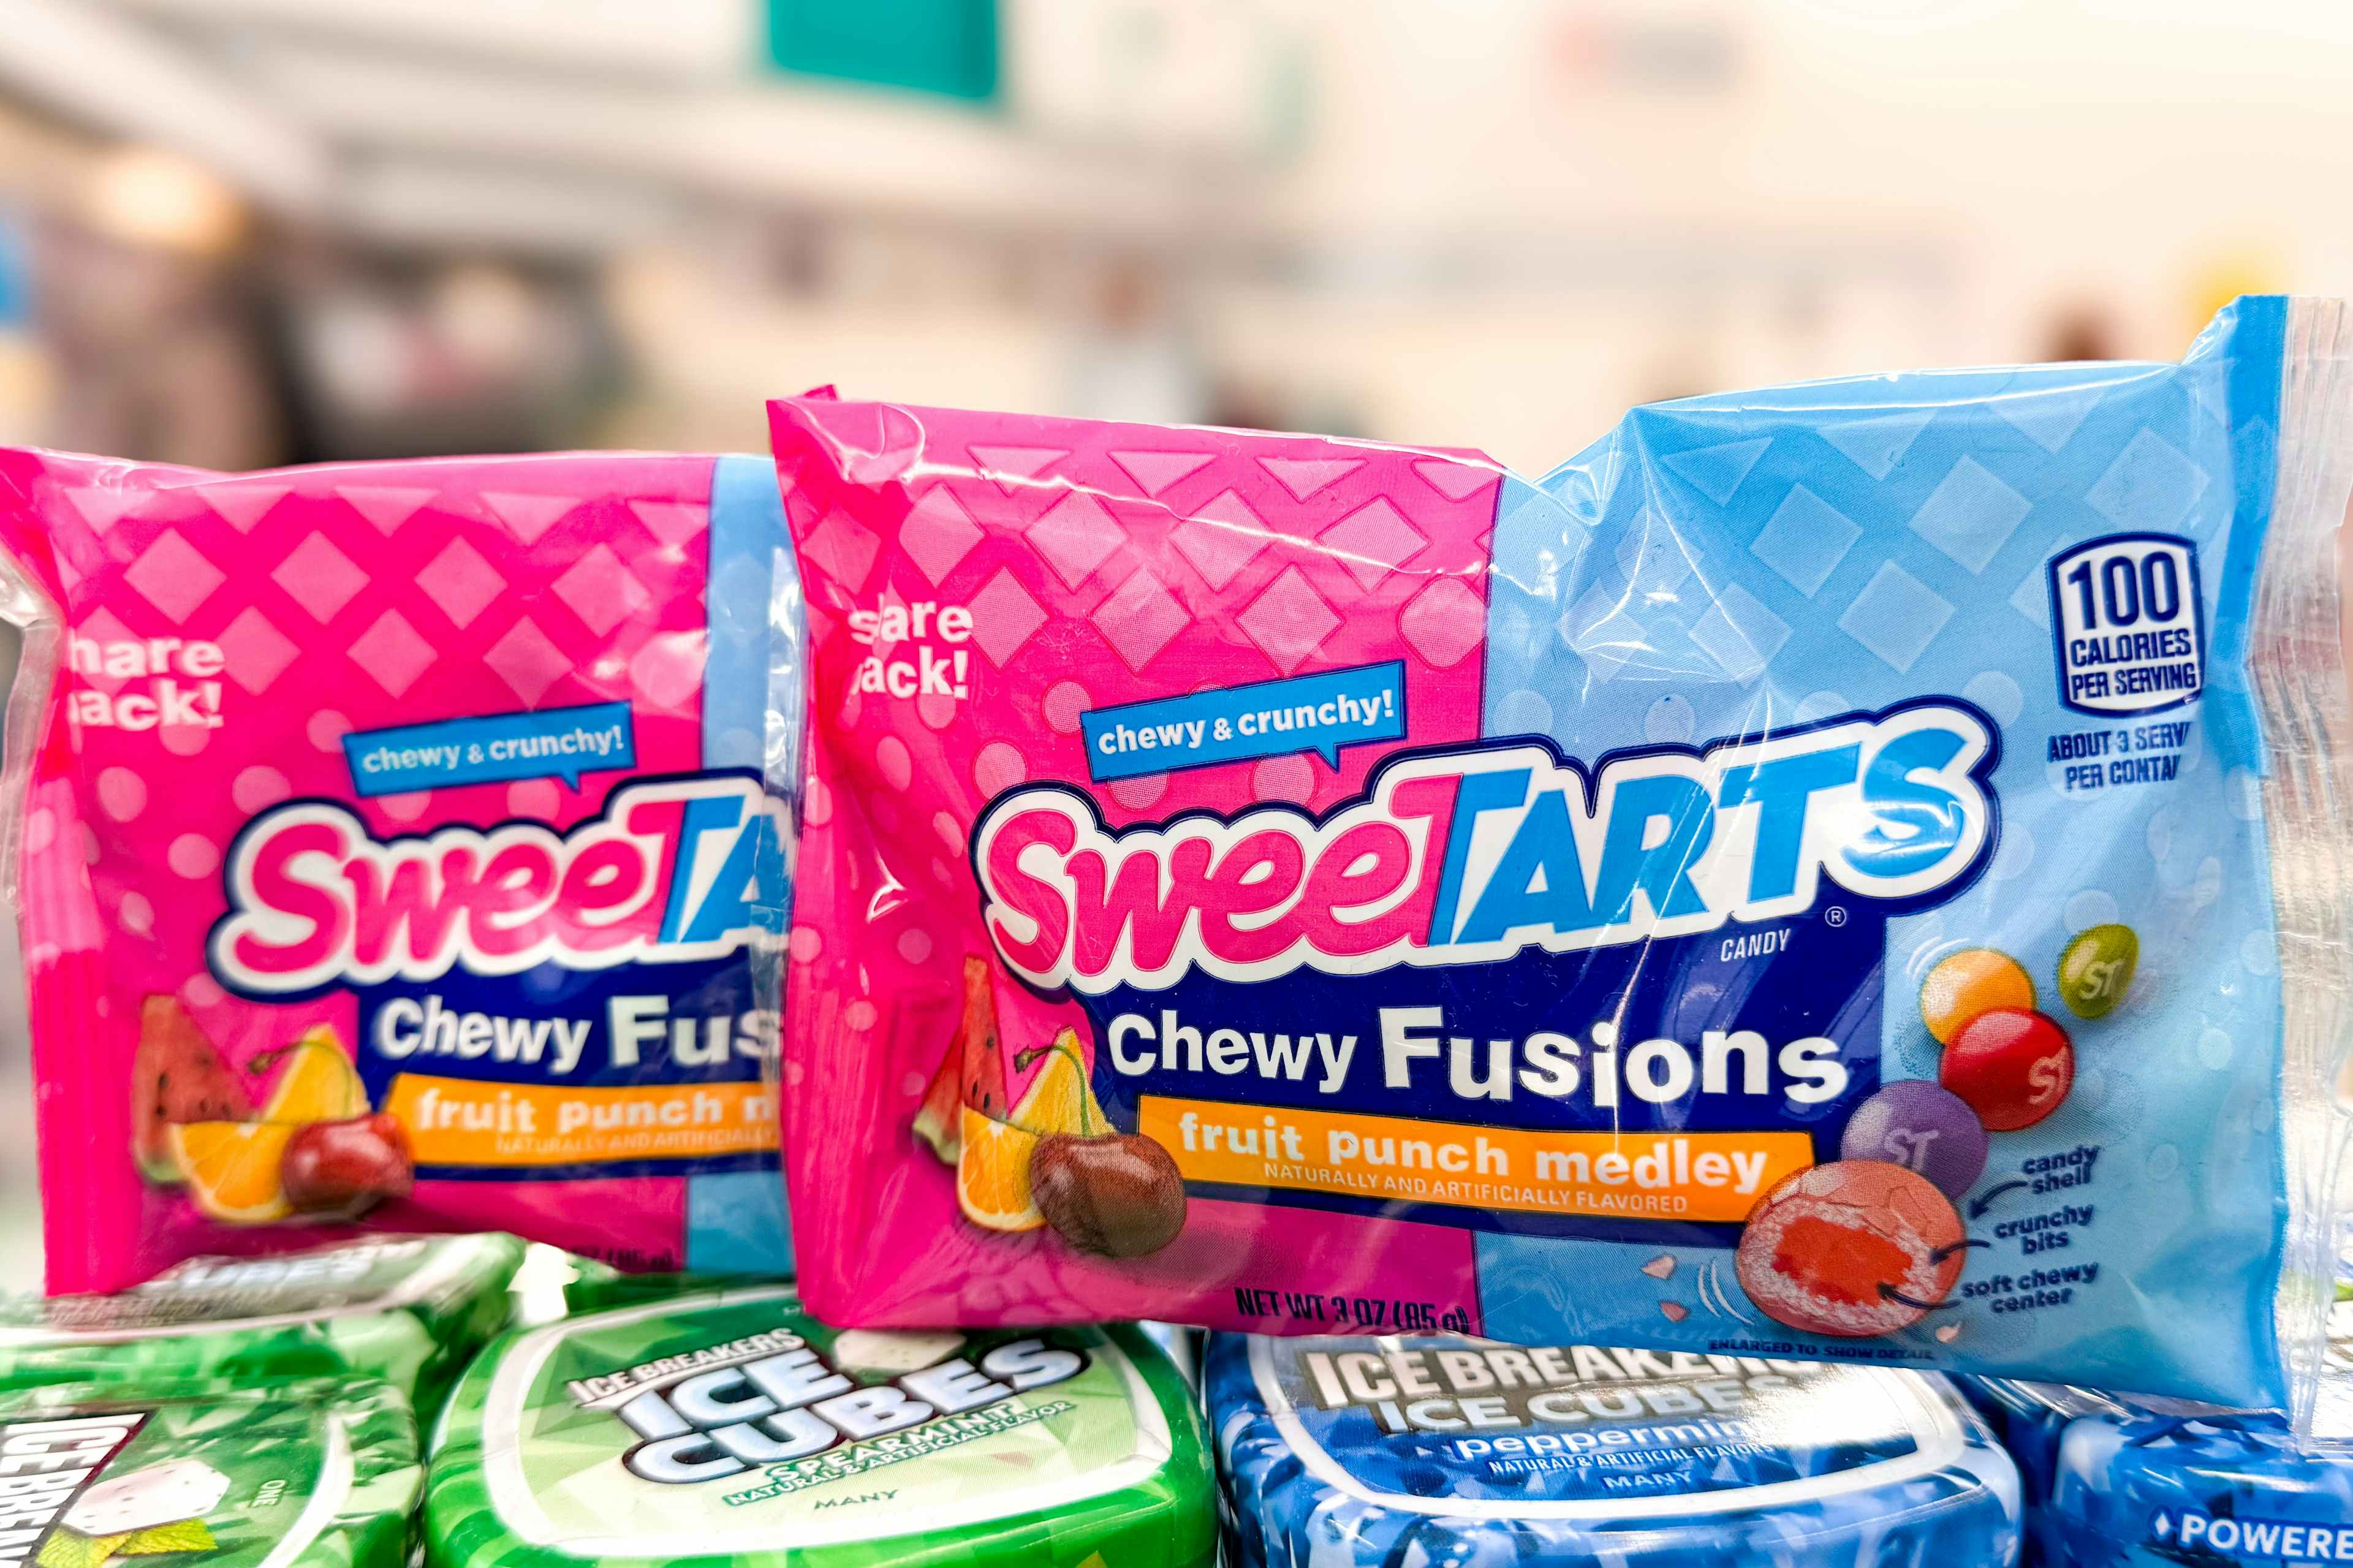 sweetarts chewy fusions candy